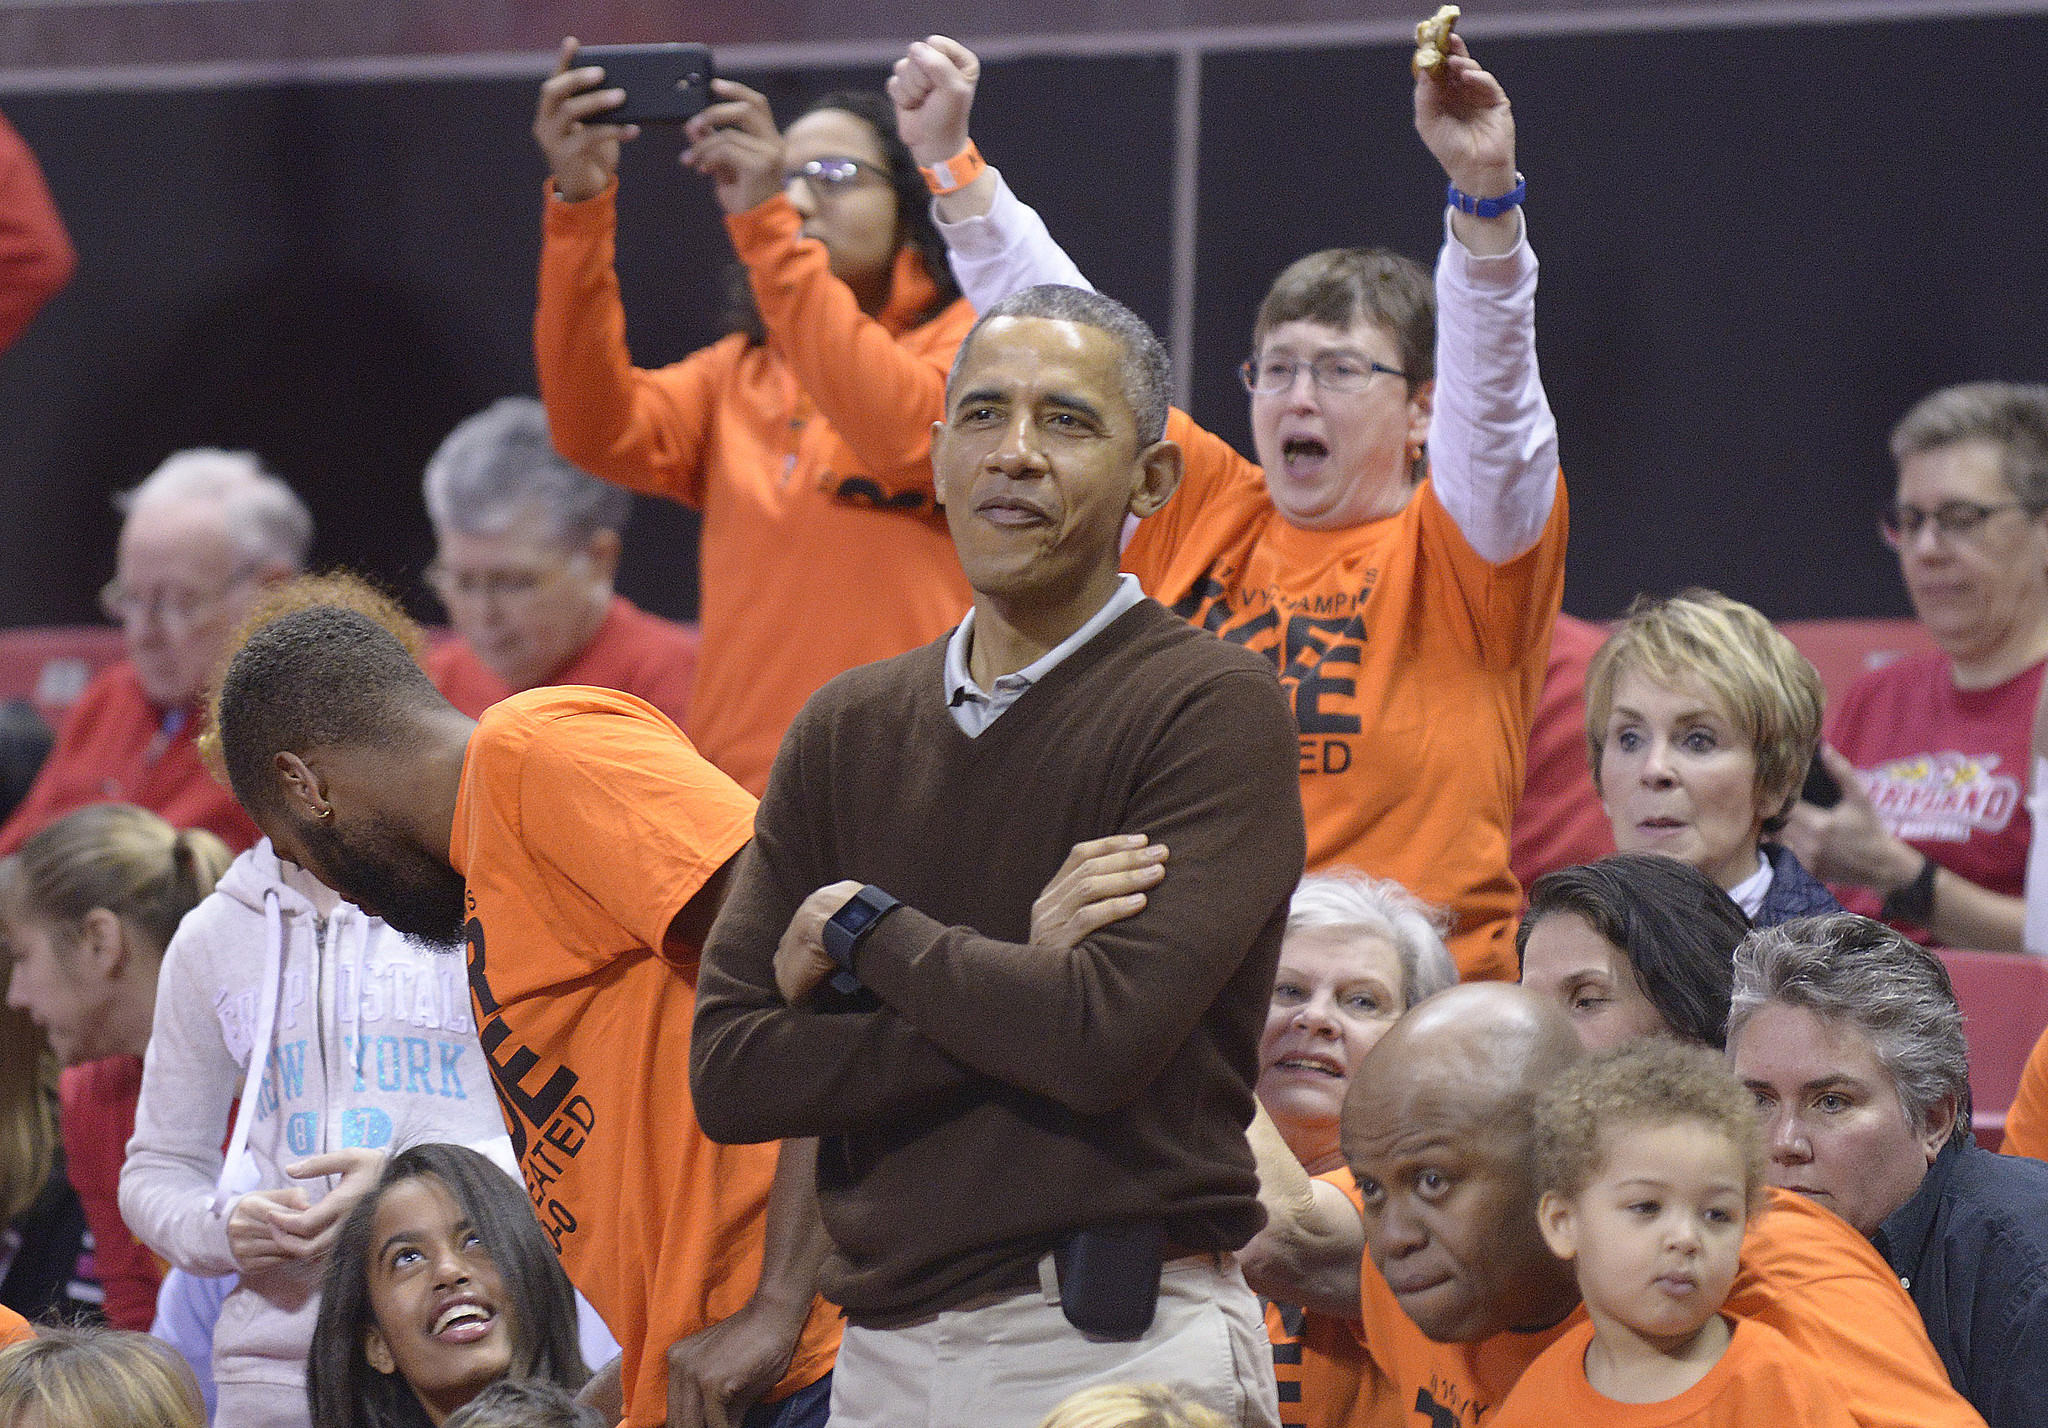 President Barack Obama attends Princeton's NCAA tournament game at